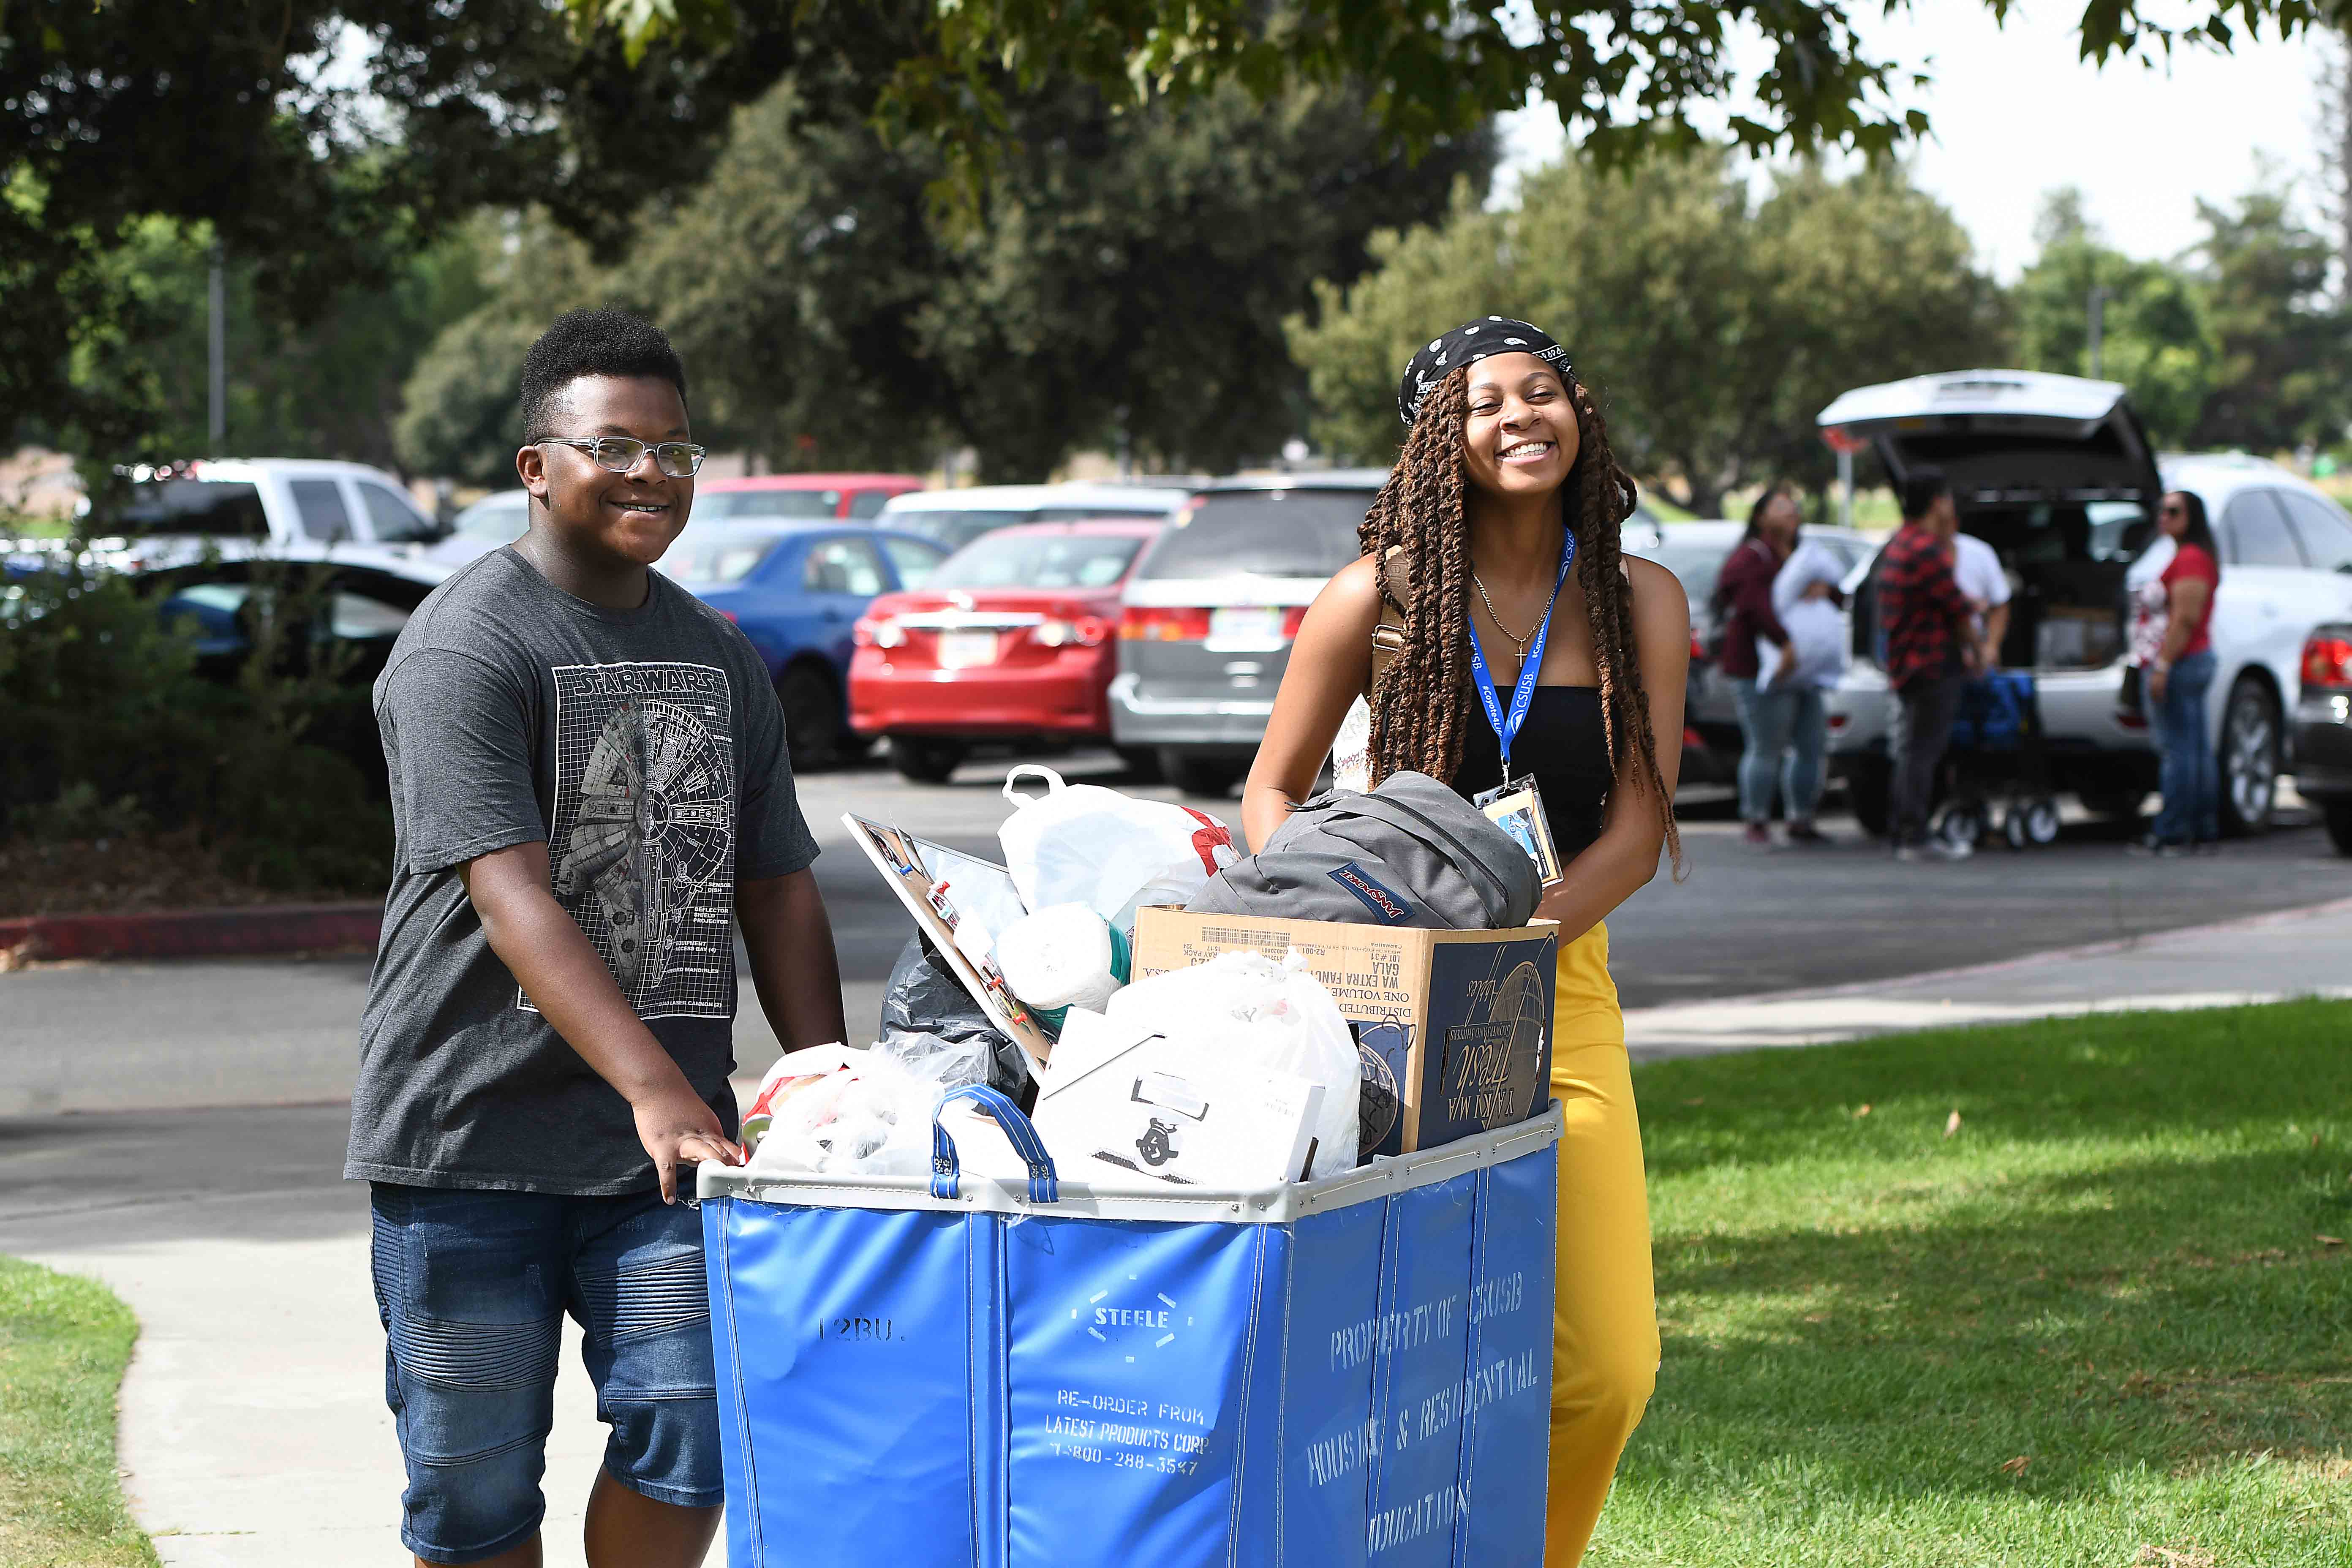 “Move-In Day” officially kicked off Welcome Week 2019 for students who will make the university’s residence halls and apartments their home for the year.  